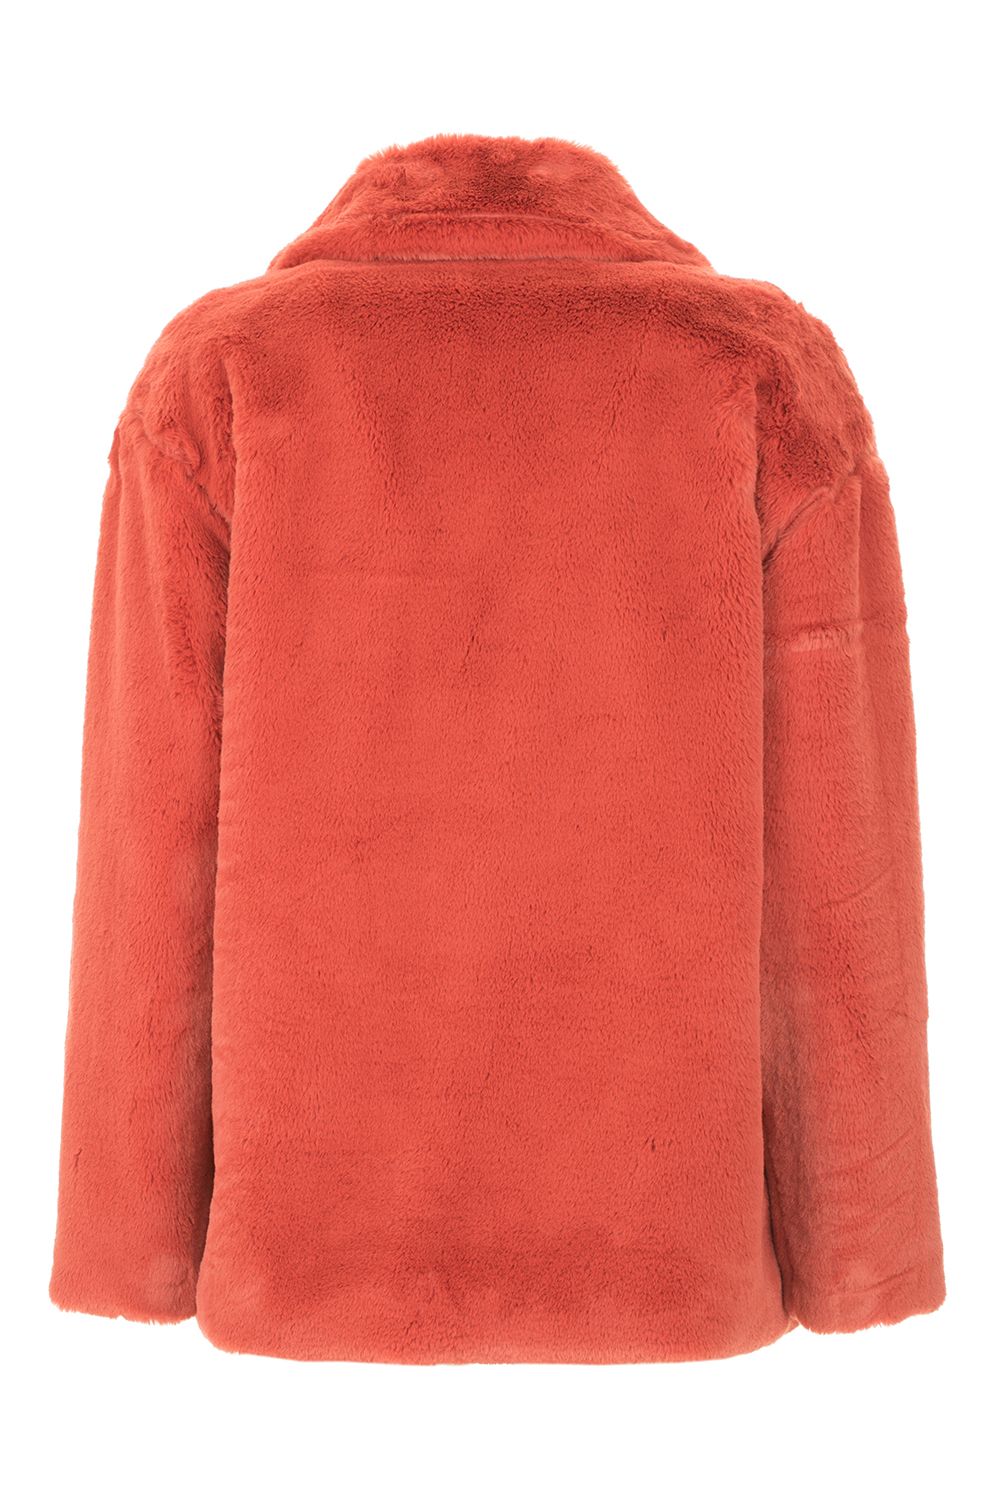 Imperfect Red Polyester Jackets & Coat